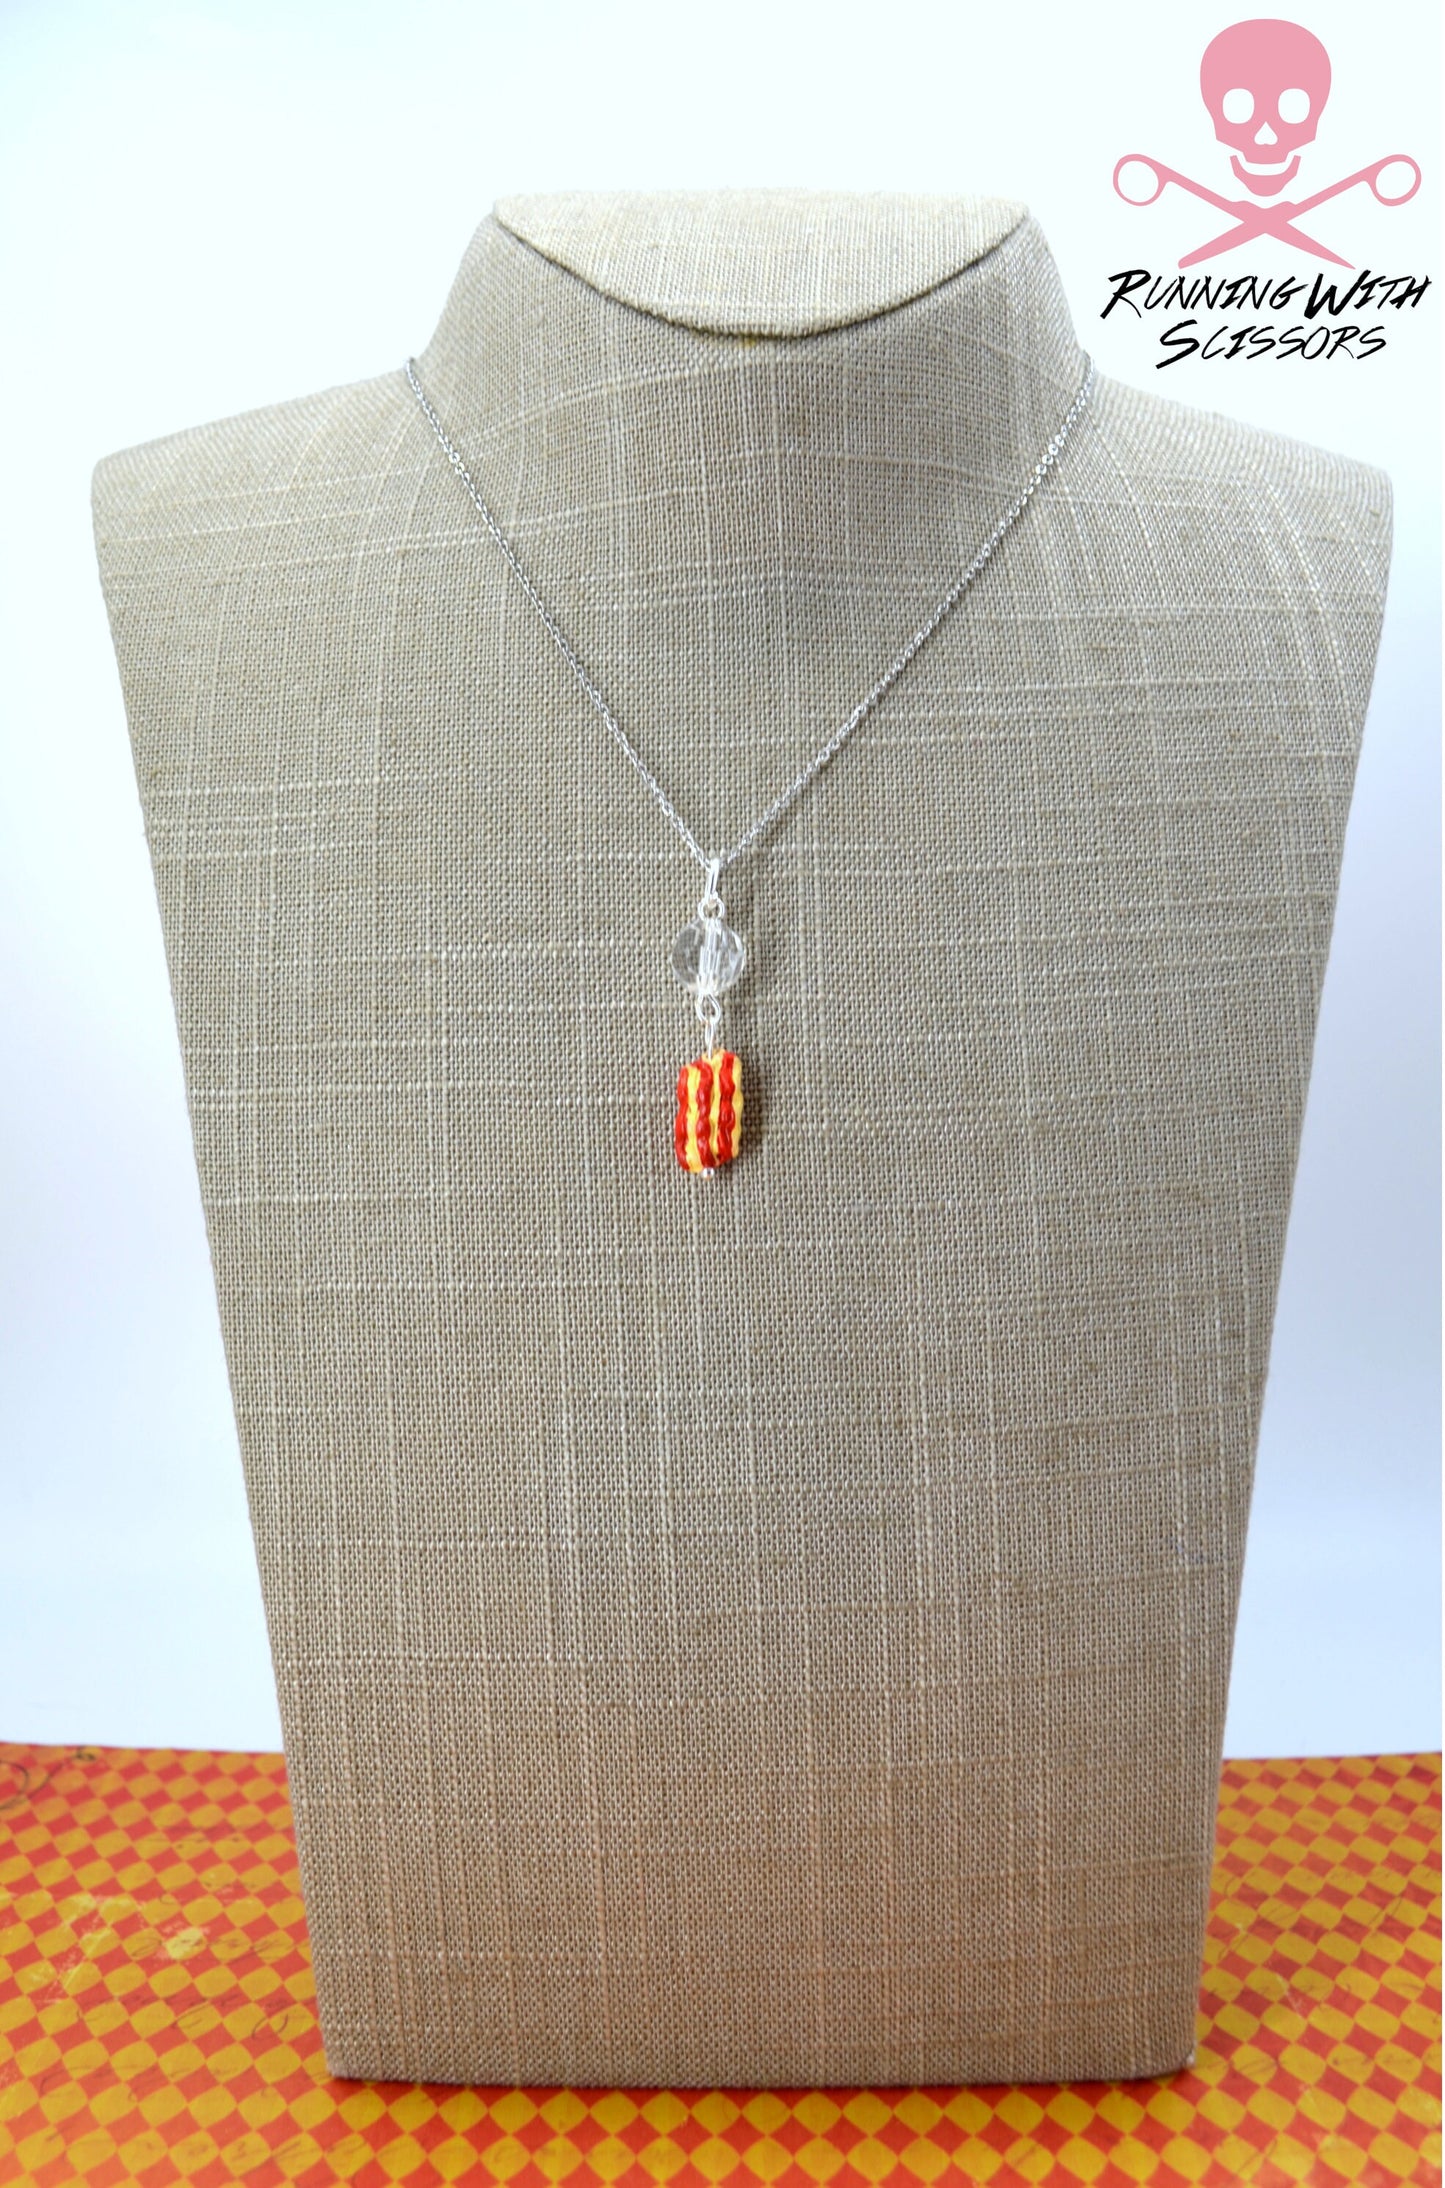 BACON AND EGGS Sending Love 2 Necklace Set